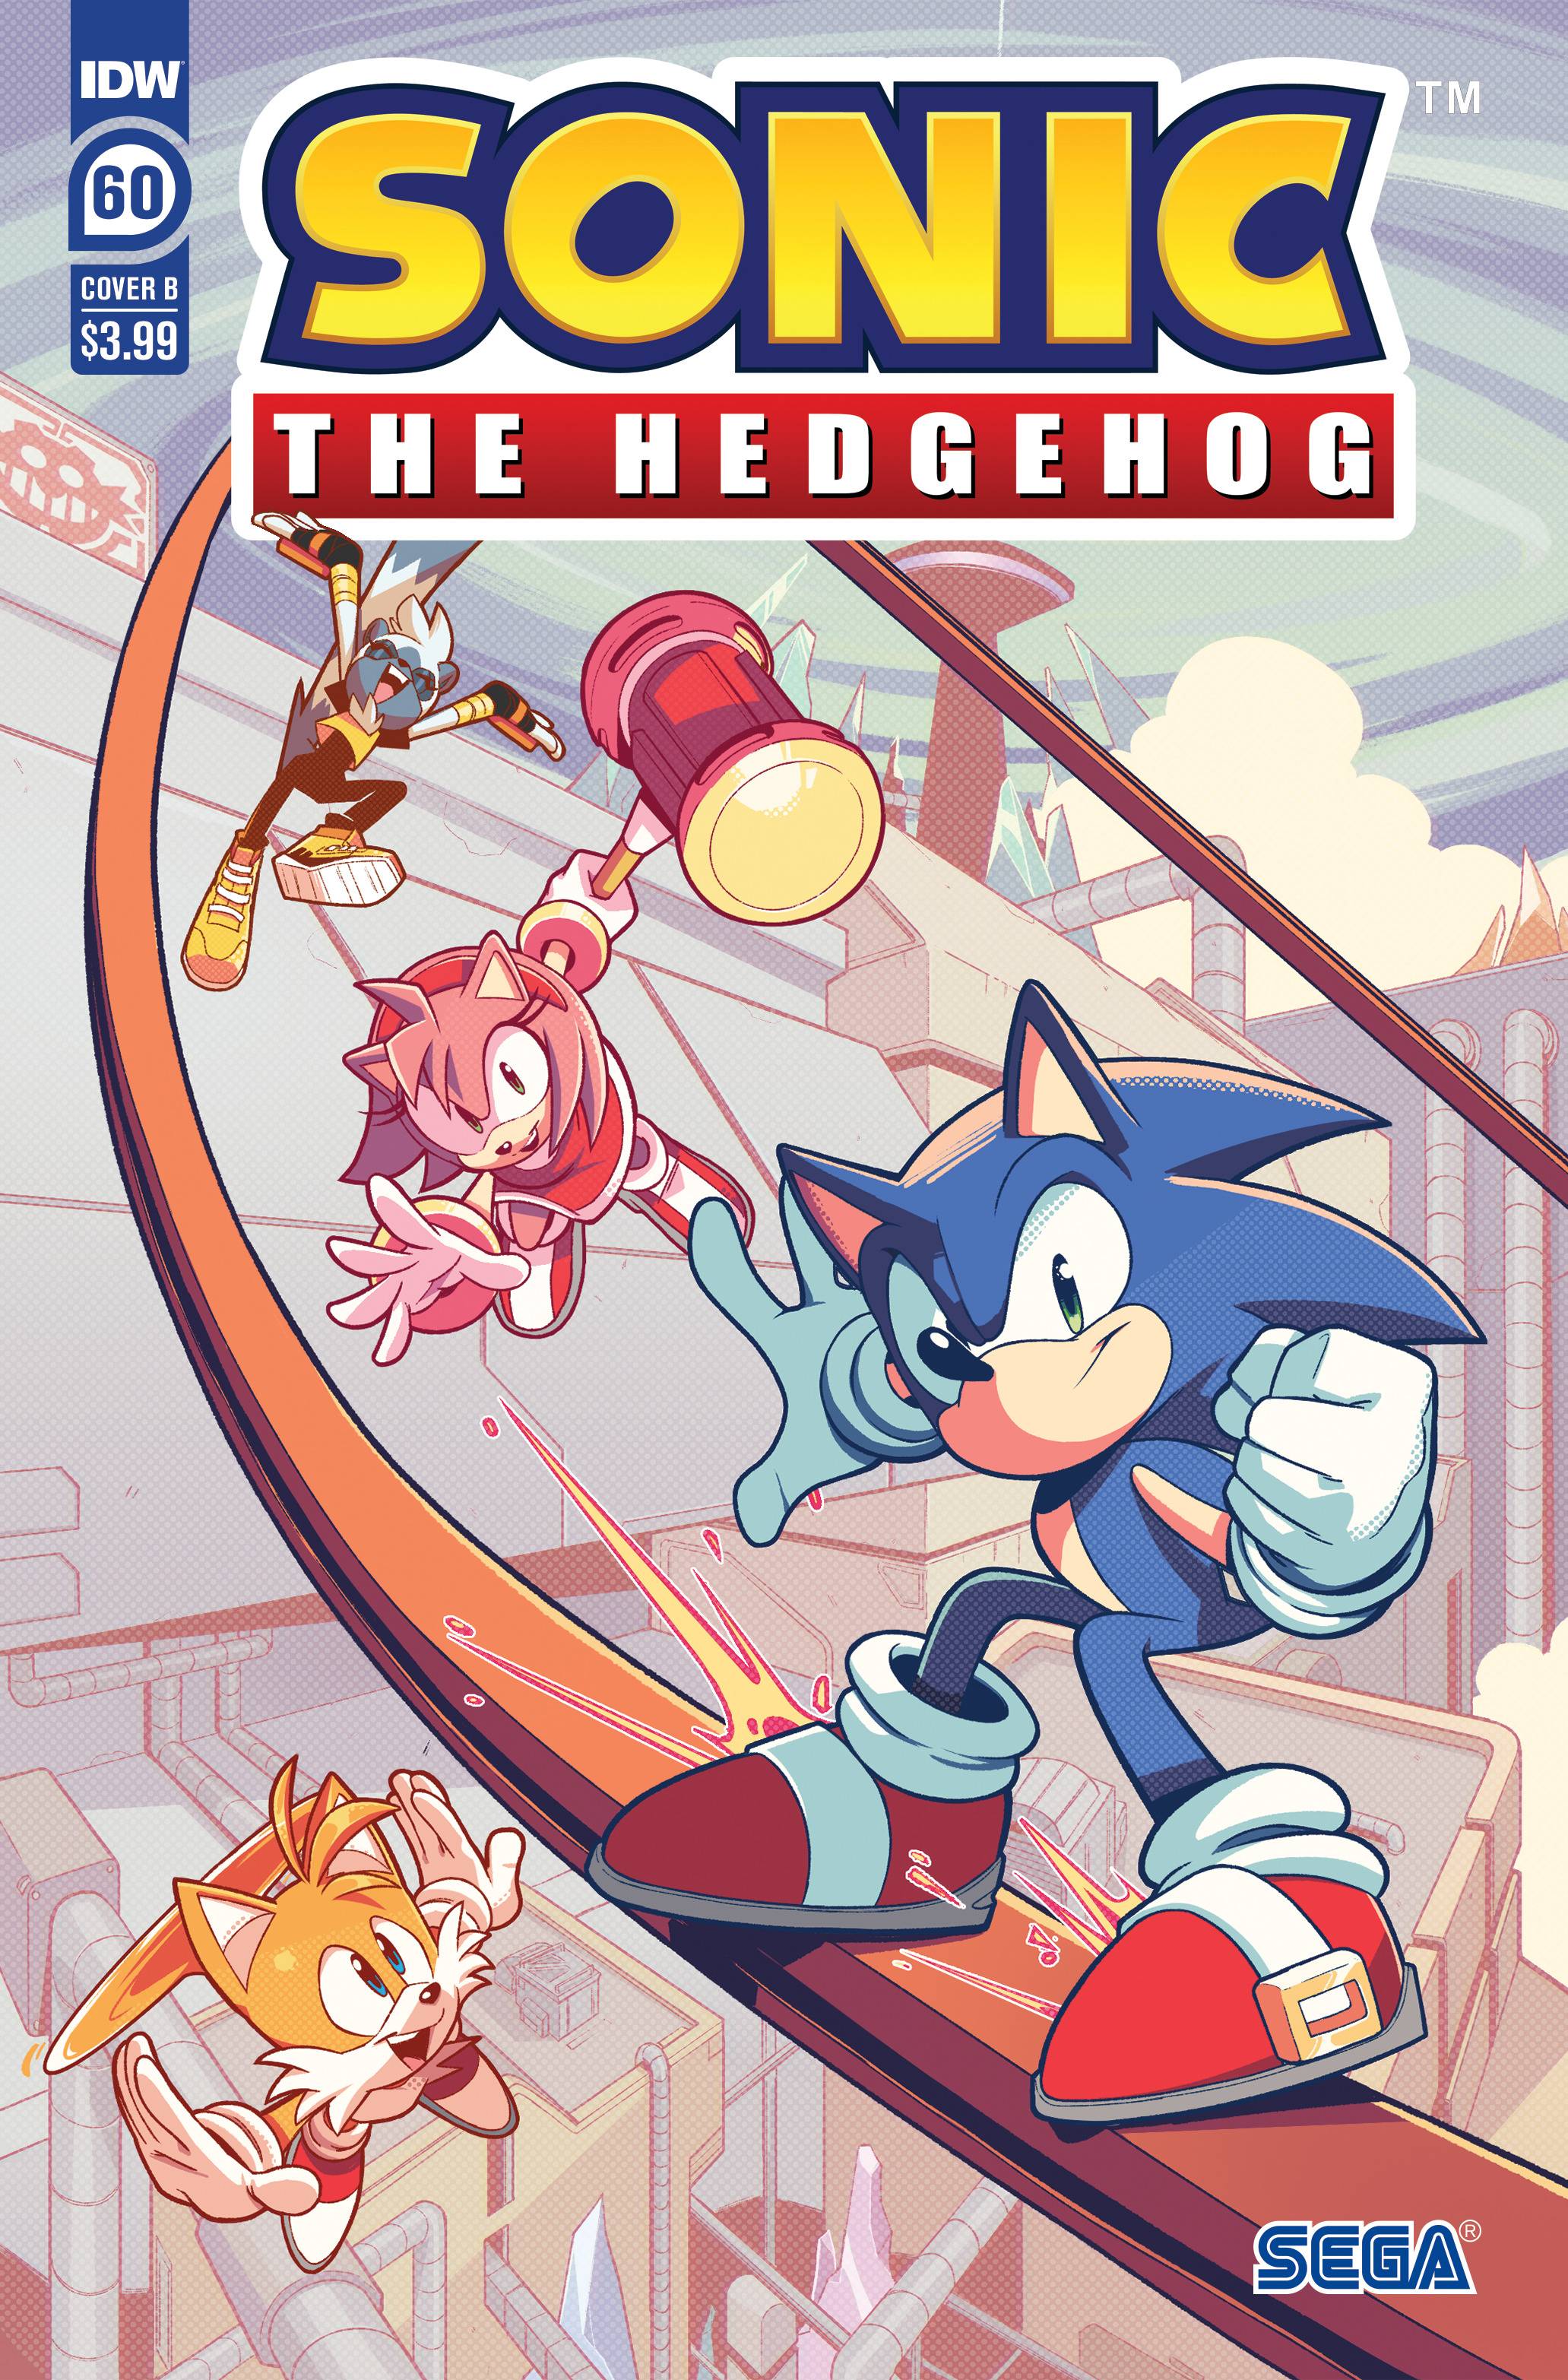 Sonic idw issue 60